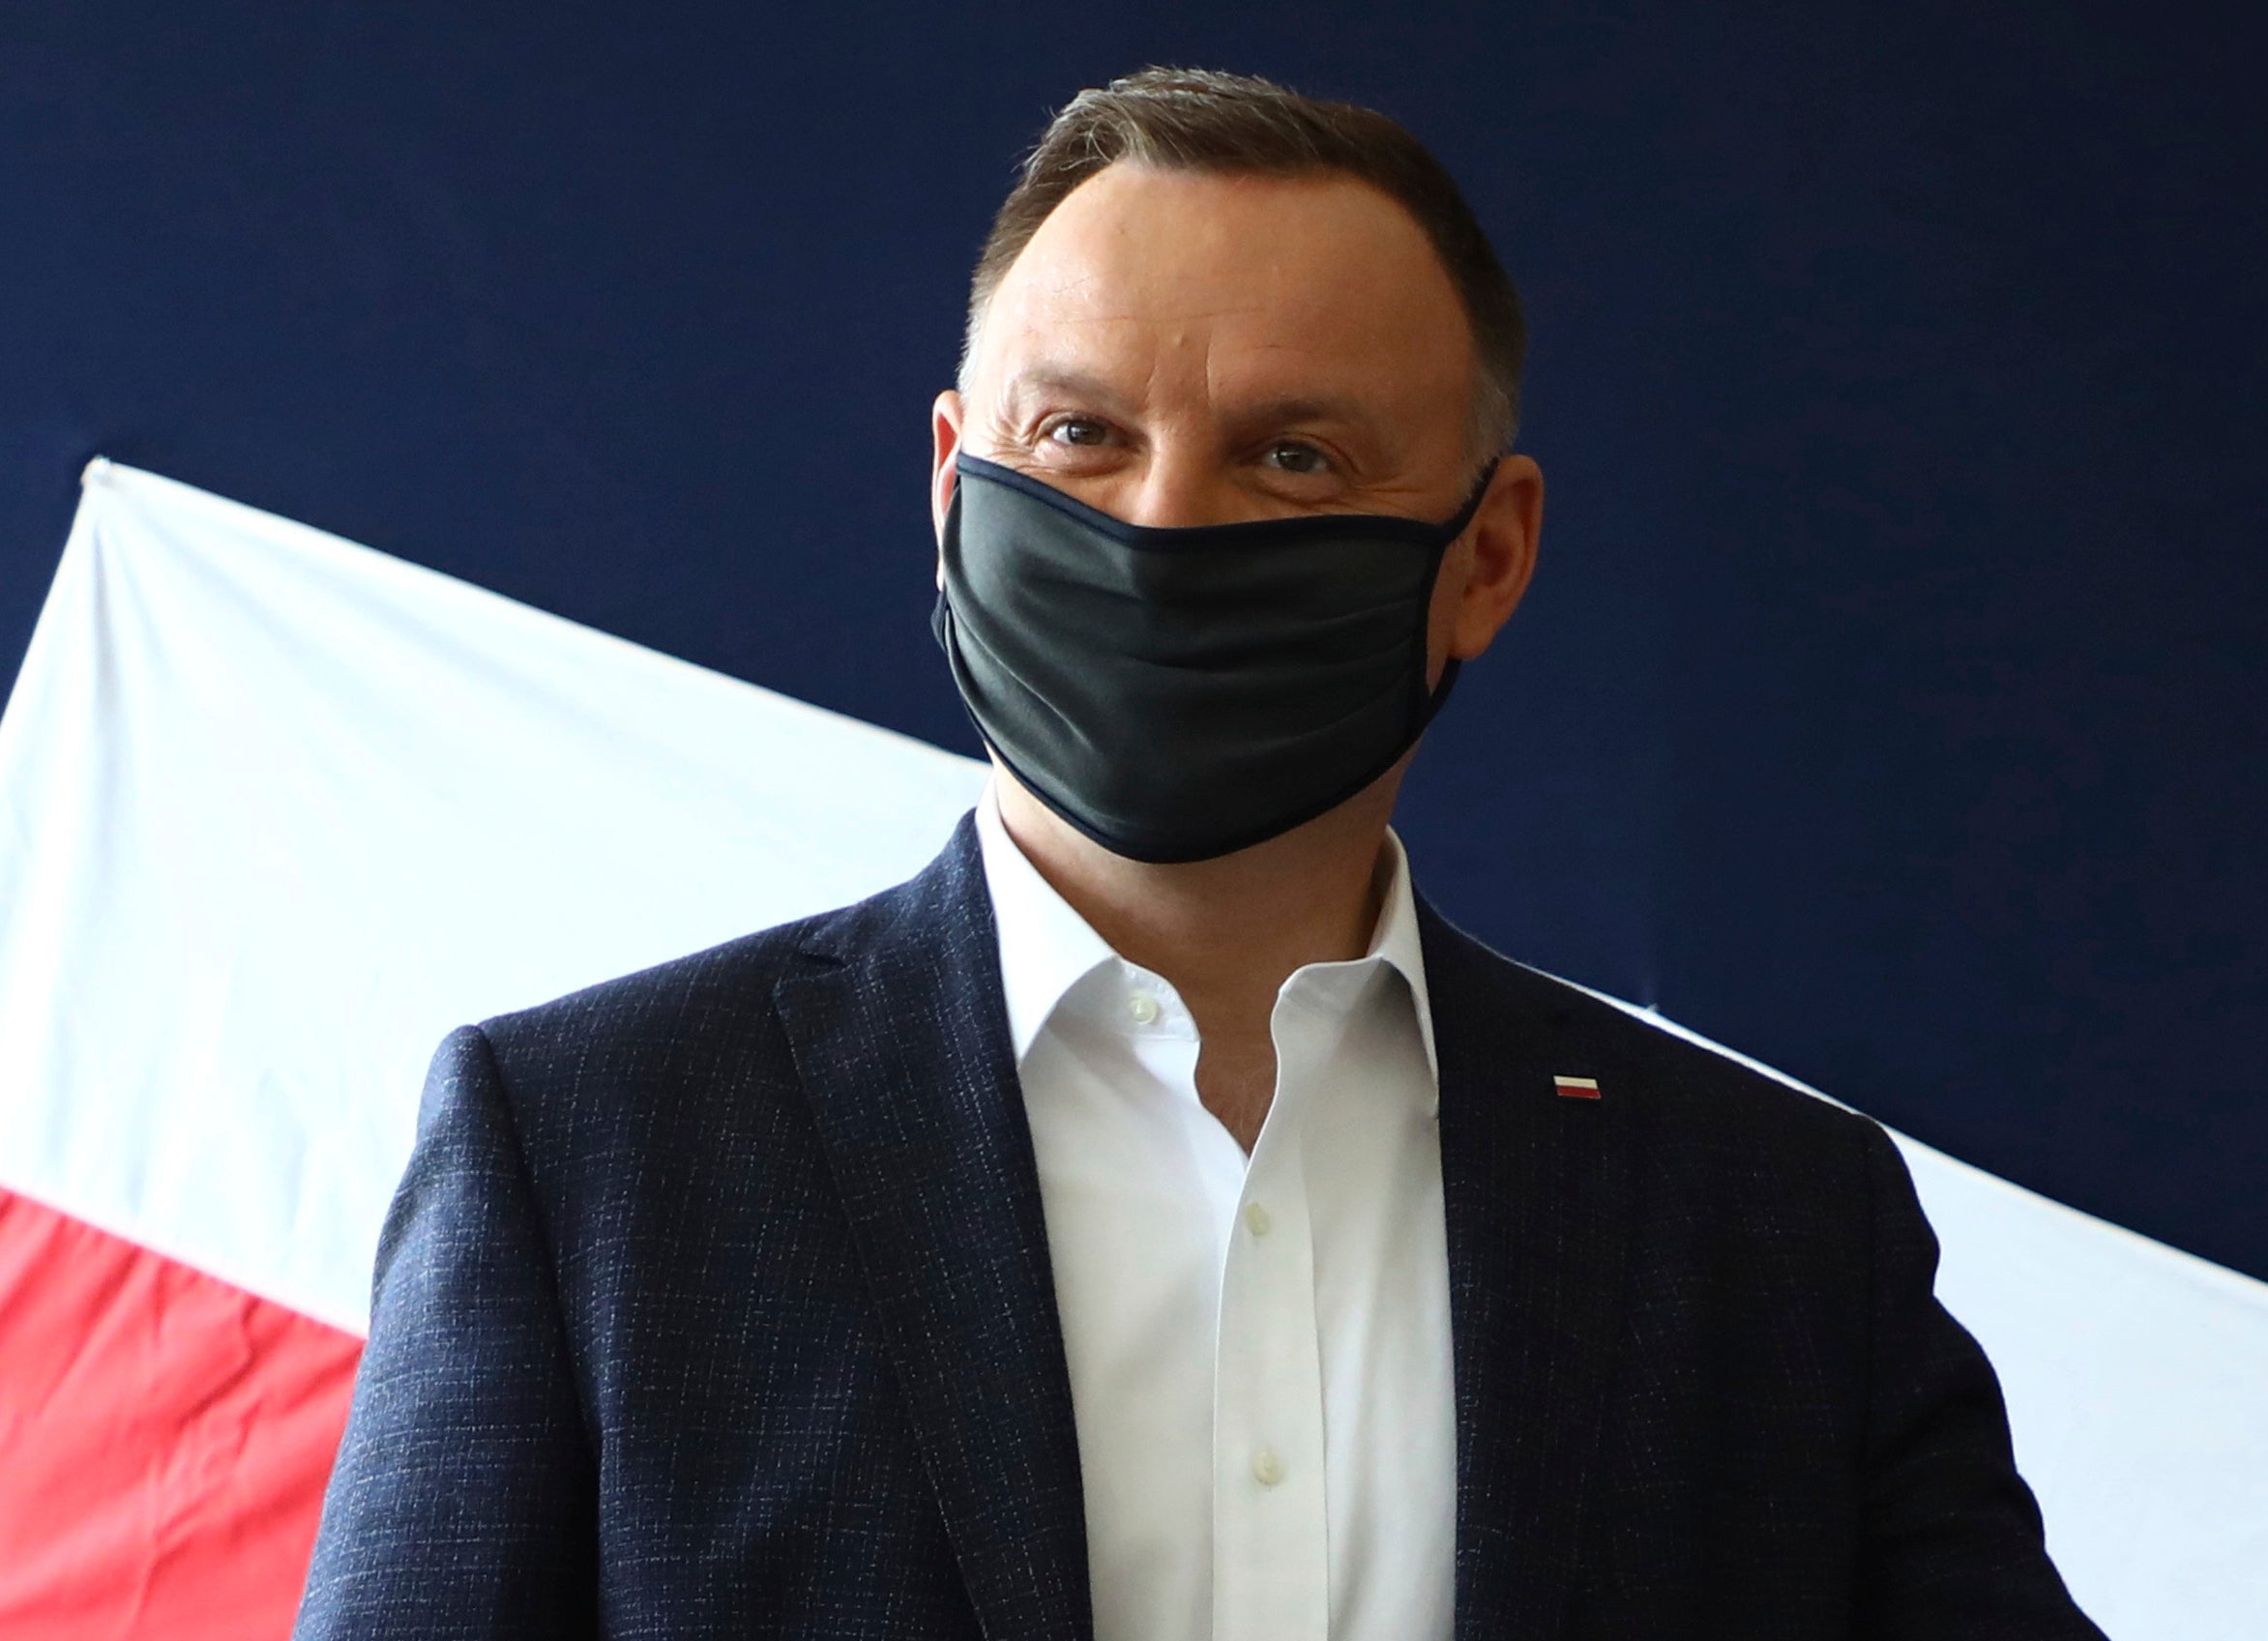 A local author and journalist could face prison for calling Poland’s president Andrzej Duda a ‘moron’